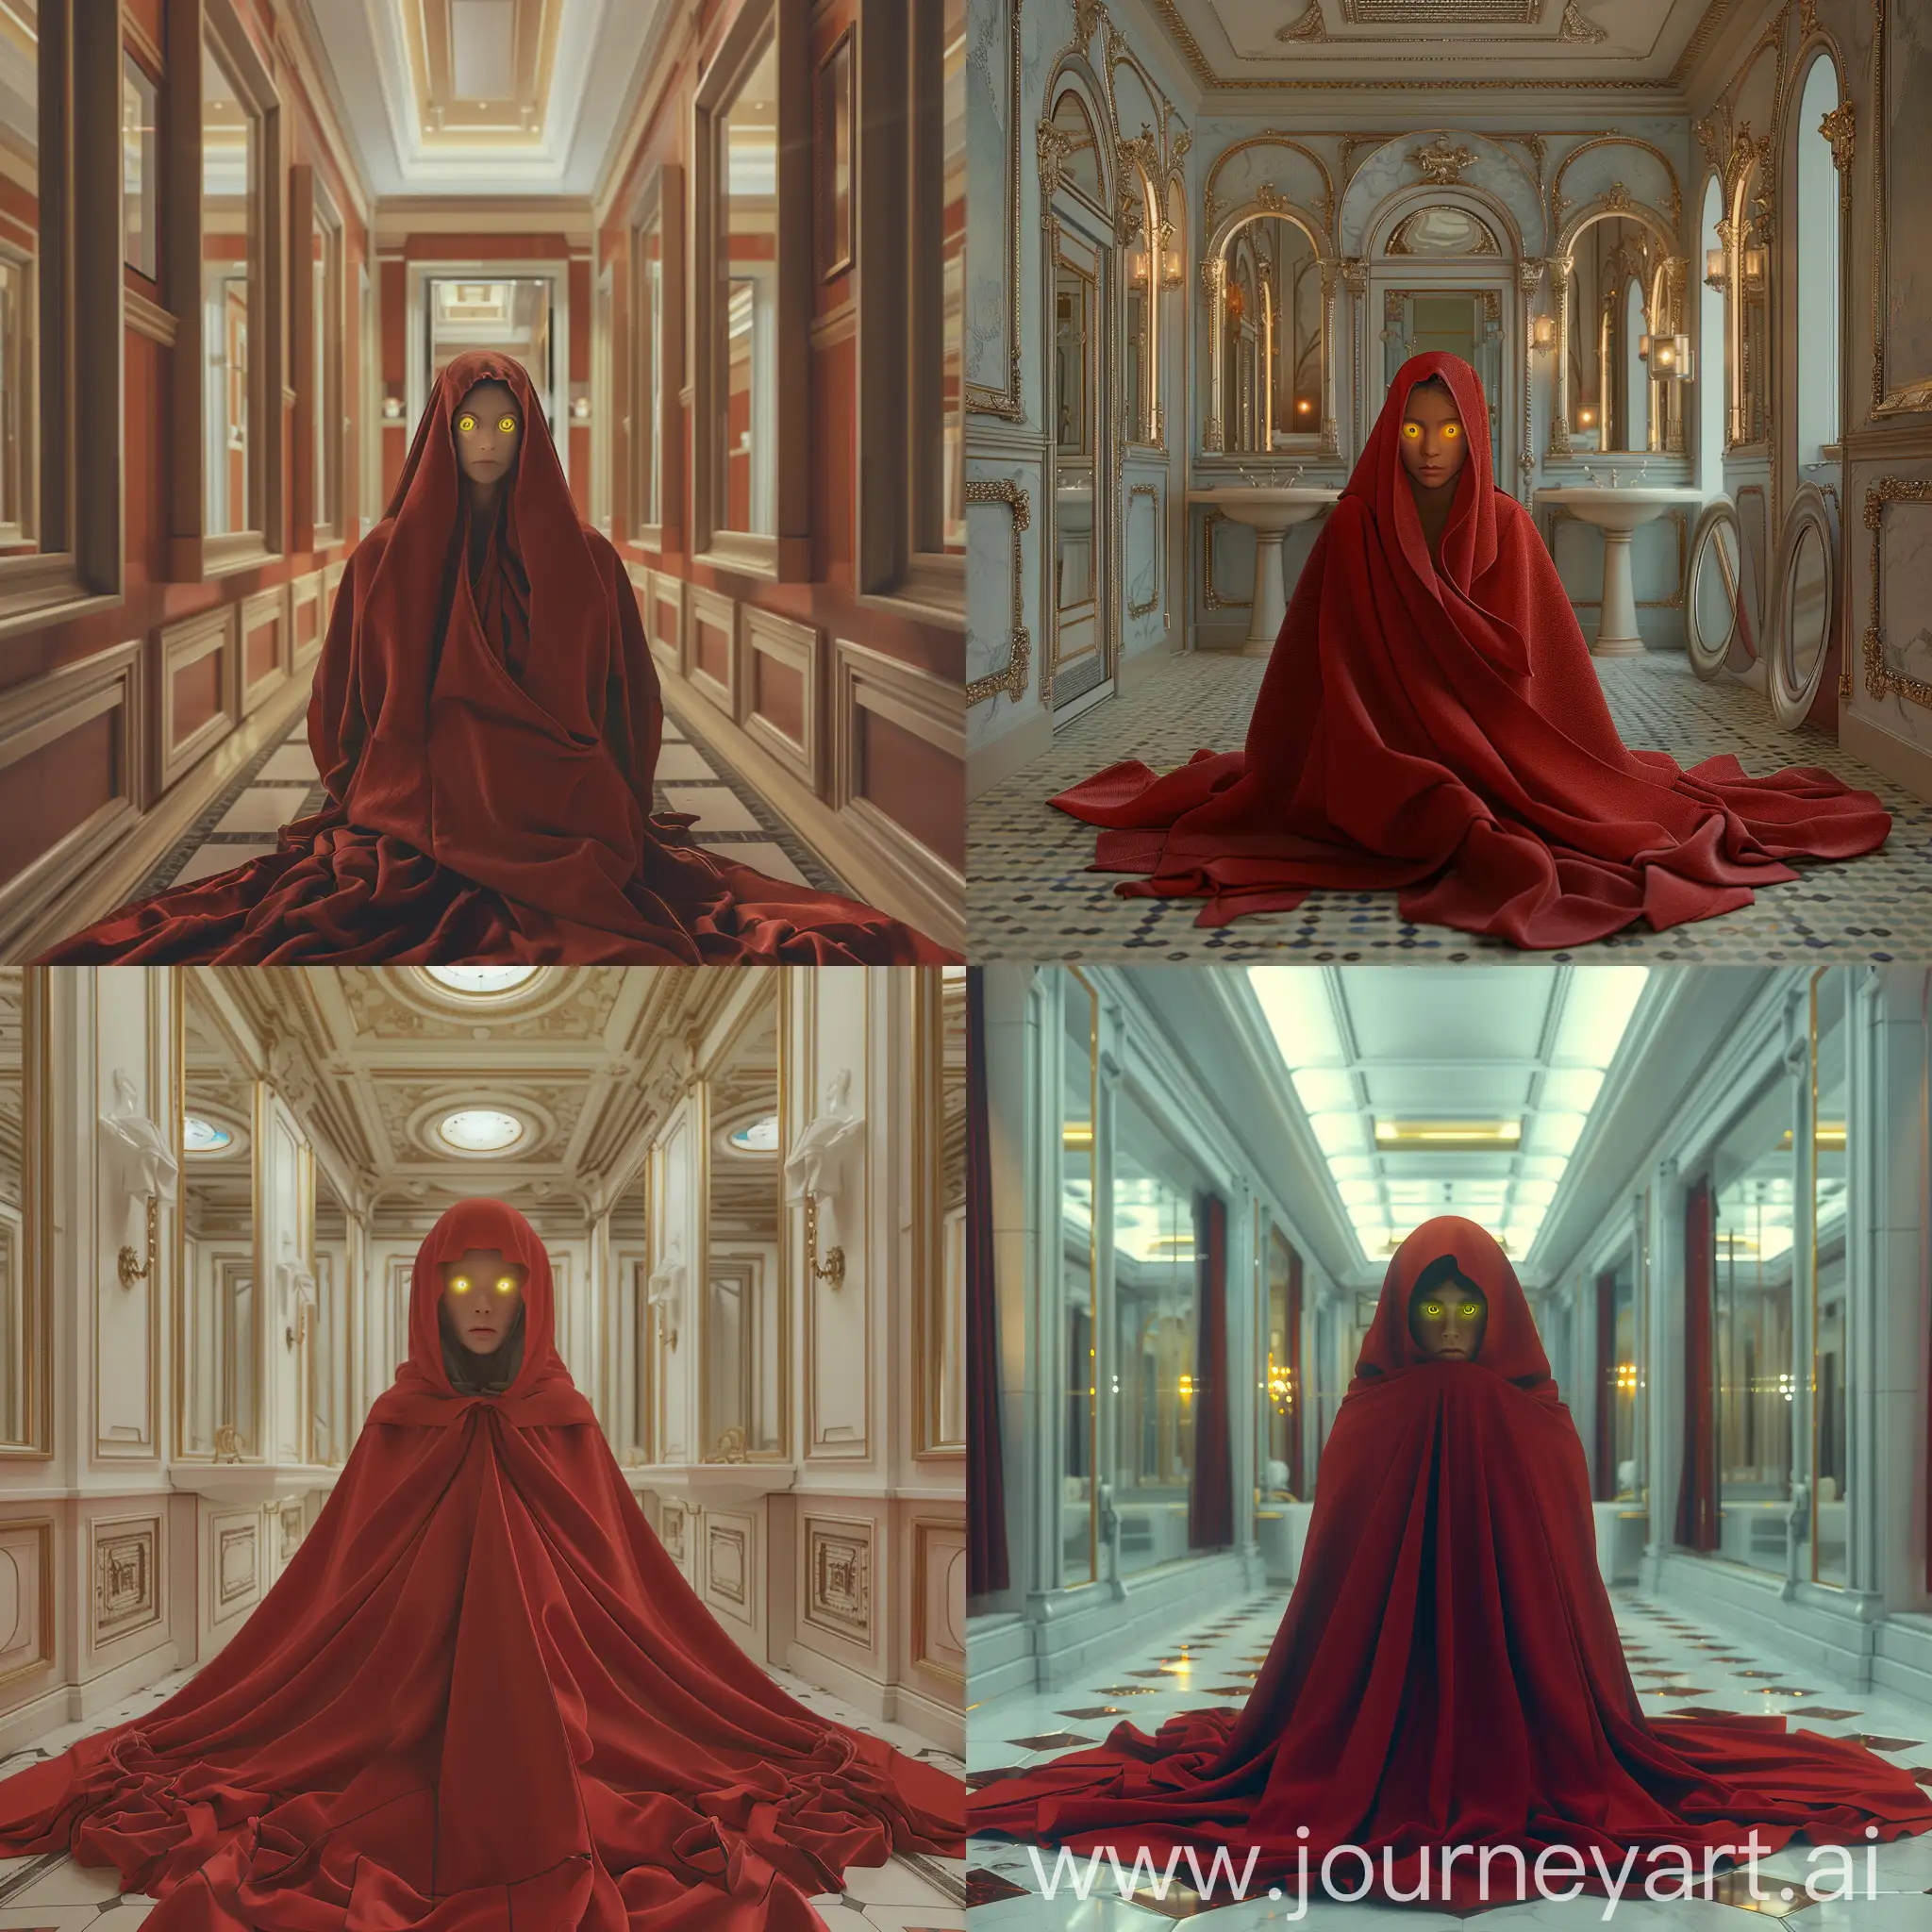 Mysterious-Woman-in-Red-Cloak-Contemplating-in-Bathroom-with-Mirrors